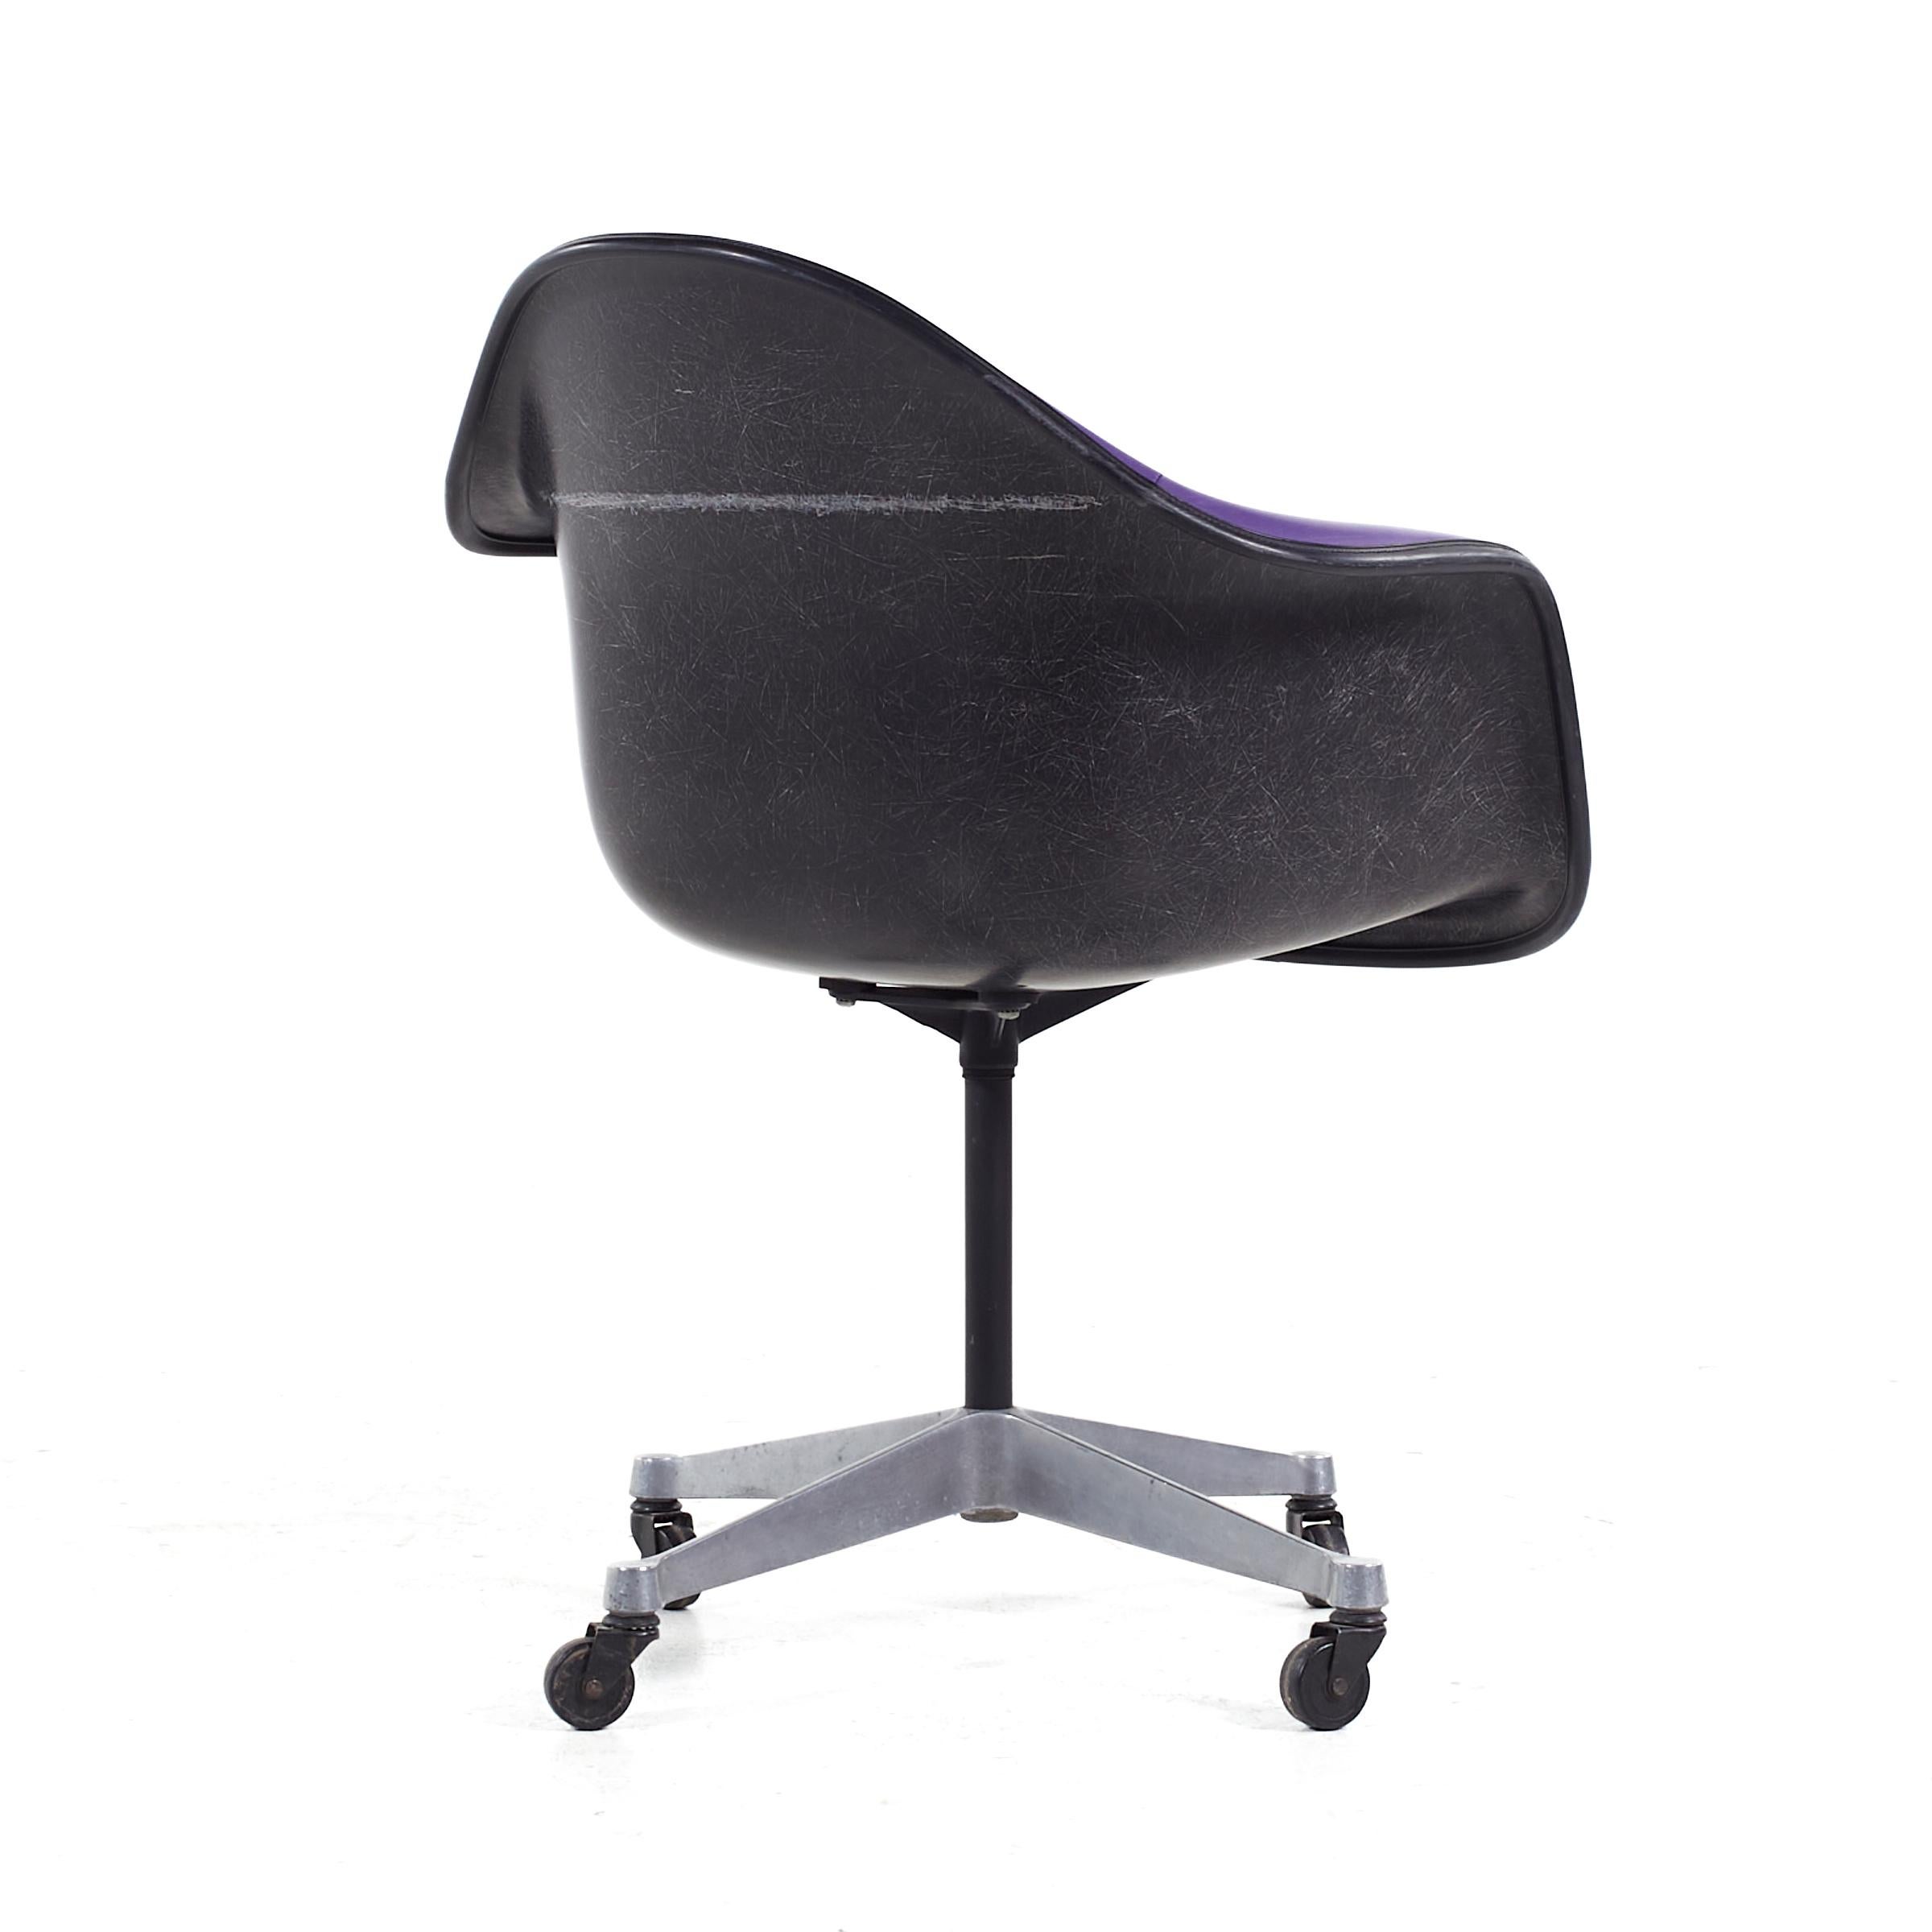 Late 20th Century Eames for Herman Miller MCM Purple Padded Fiberglass Swivel Office Chair For Sale